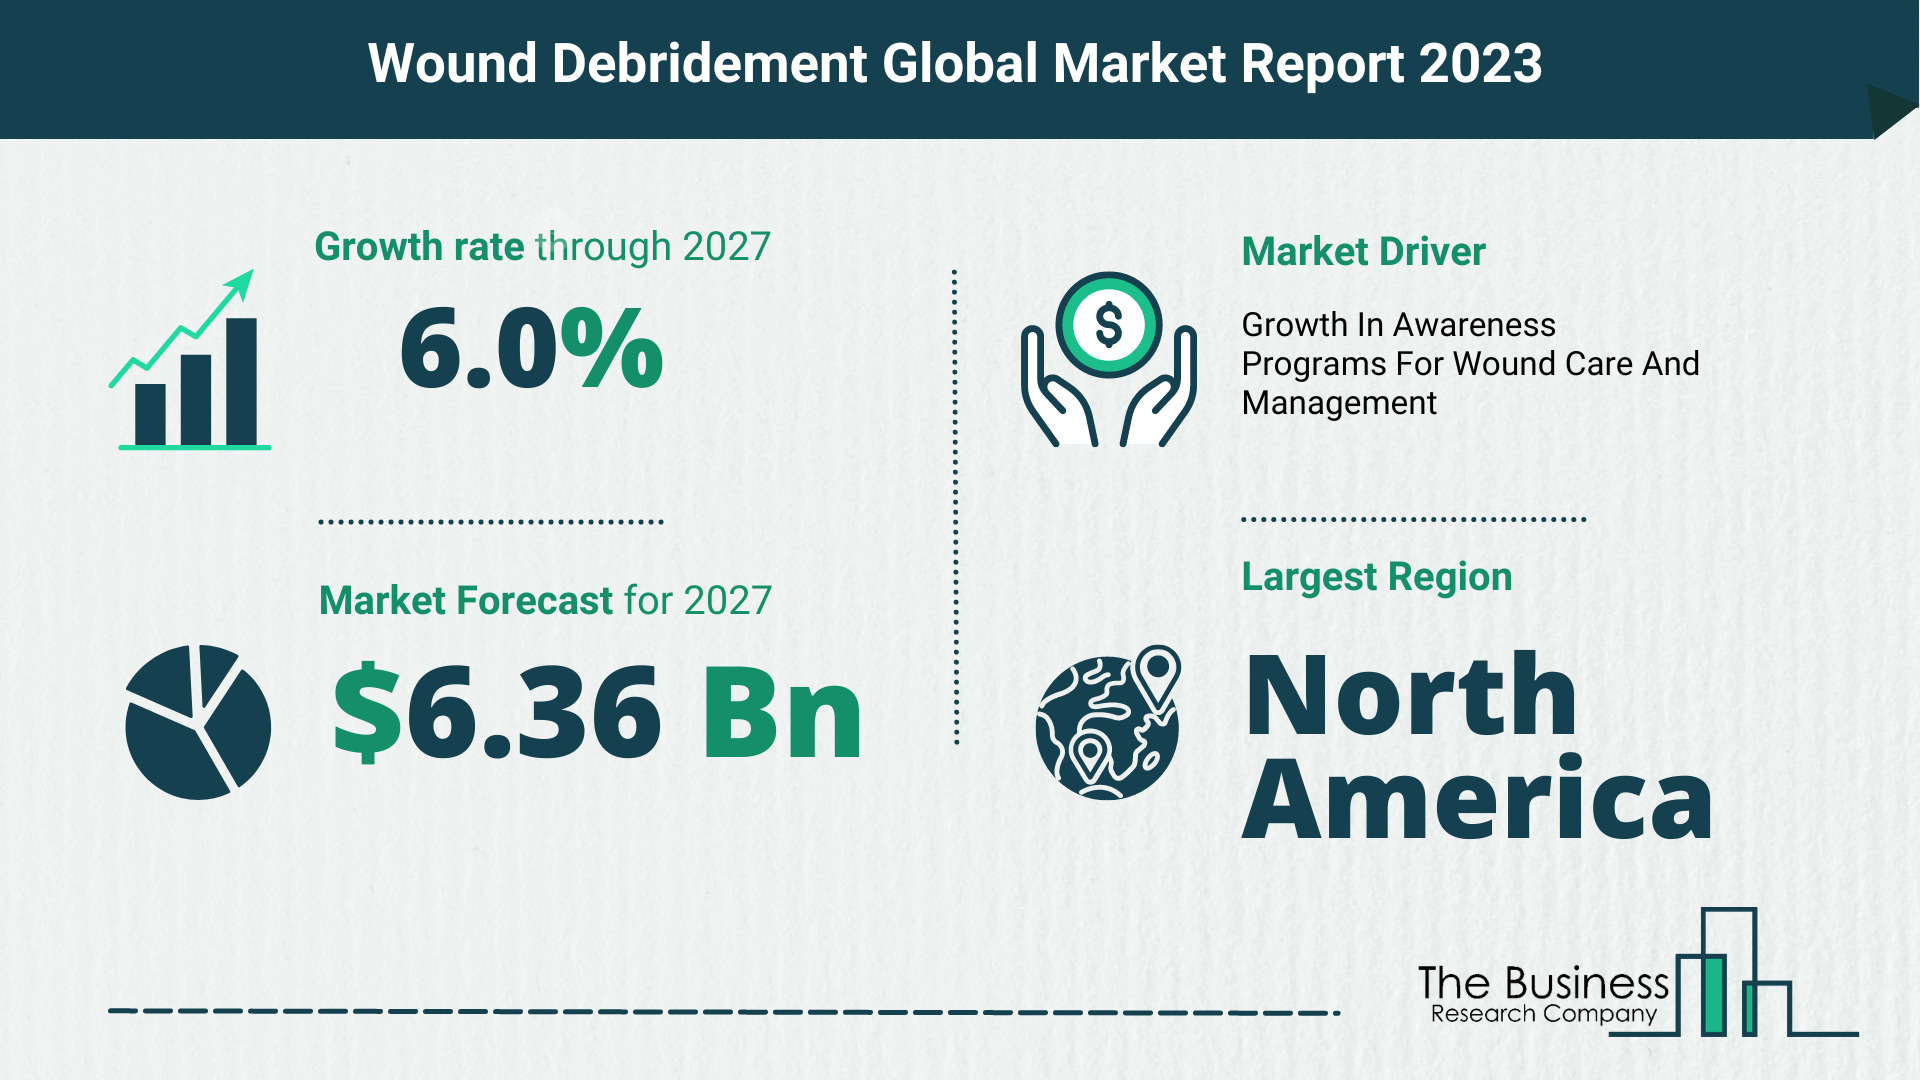 How Will The Wound Debridement Market Globally Expand In 2023?